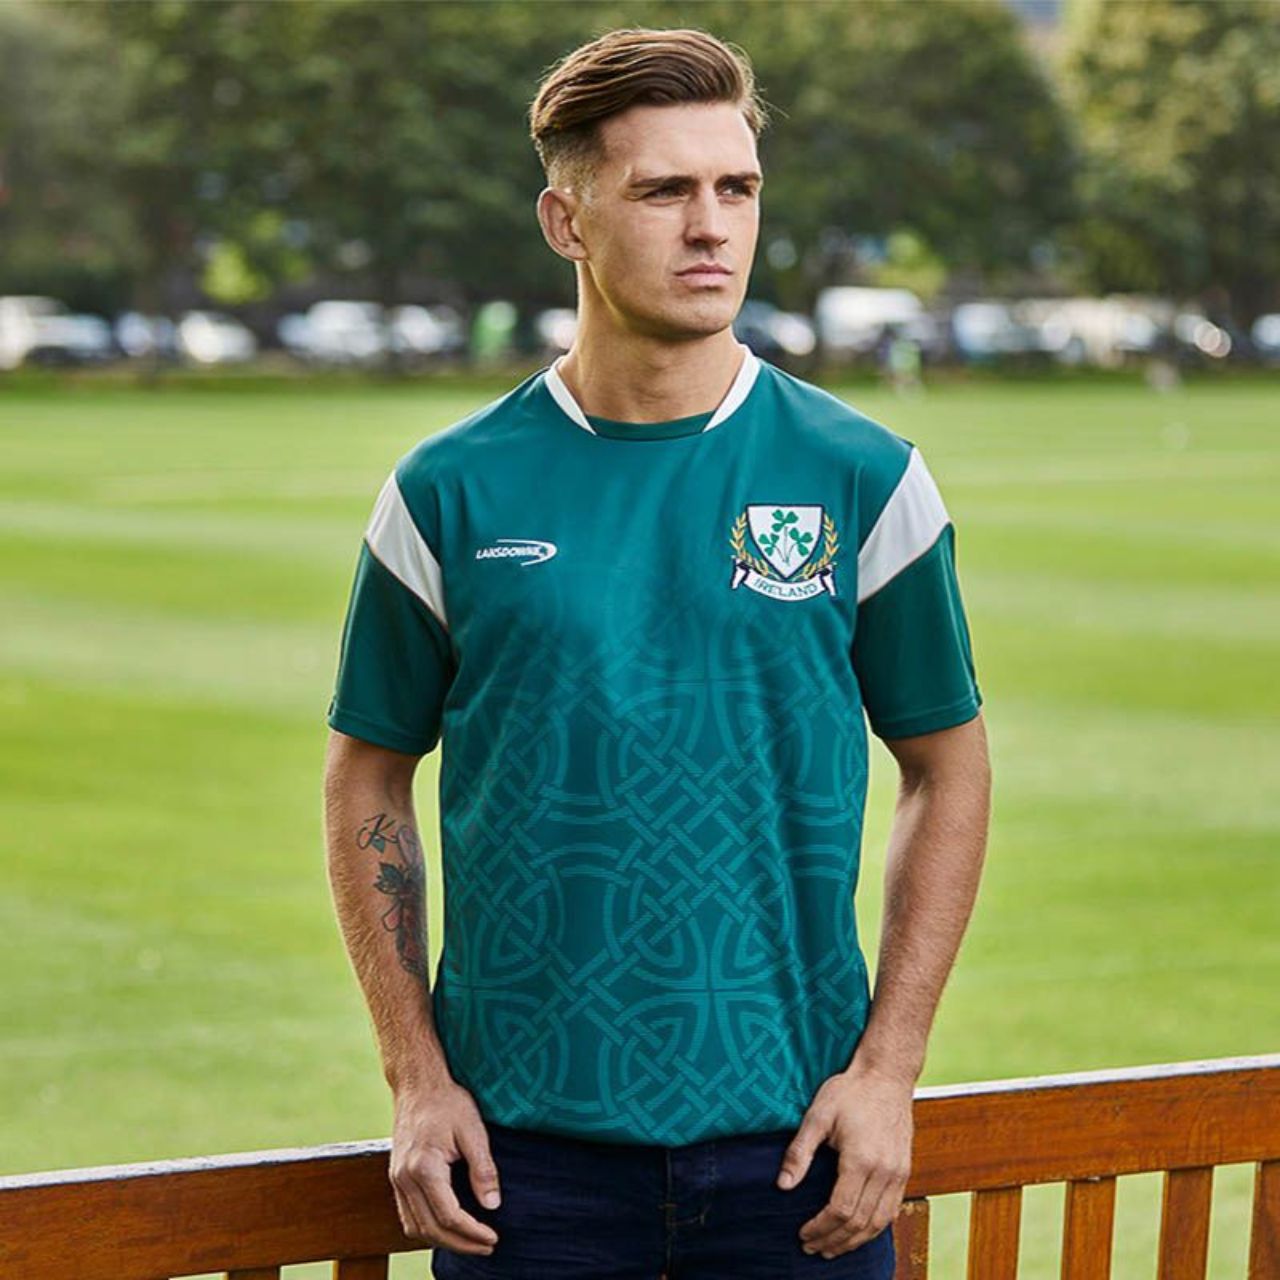 This Green performance T-shirt is part of the Lansdowne Sports Official Collection. Constructed with precision using a sophisticated sublimation process, this performance t-shirt is ideal for athletic activities due to its specialized dry fit material. The material helps stabilize core temperature while enhancing breathability and comfort.